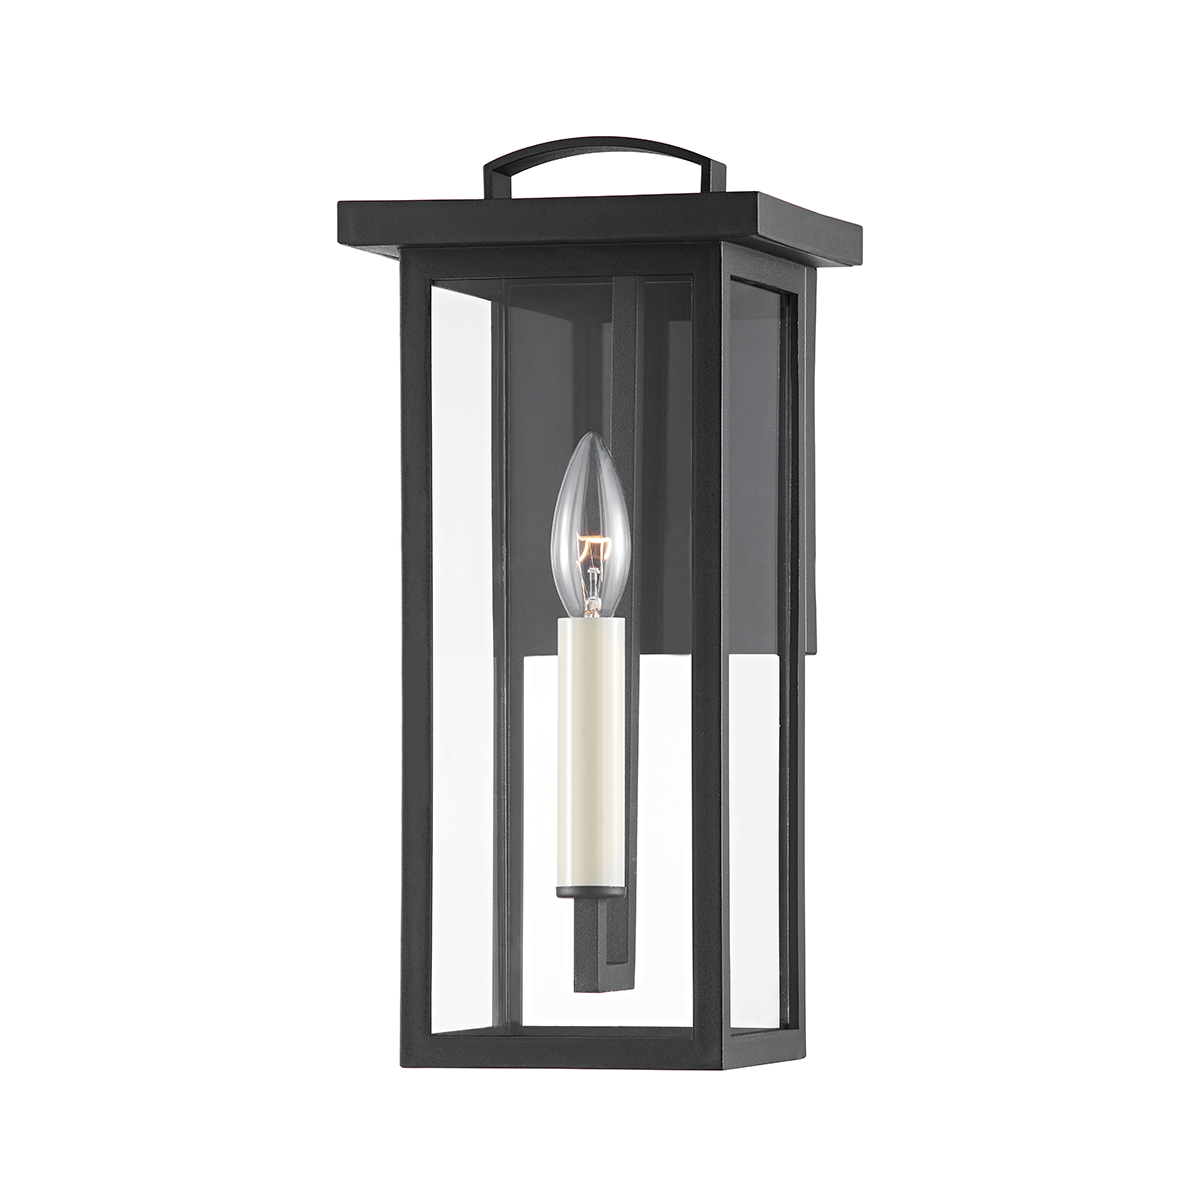 Troy Lighting 1 LIGHT SMALL EXTERIOR WALL SCONCE B7521 Outdoor l Wall Troy Lighting TEXTURE BLACK  